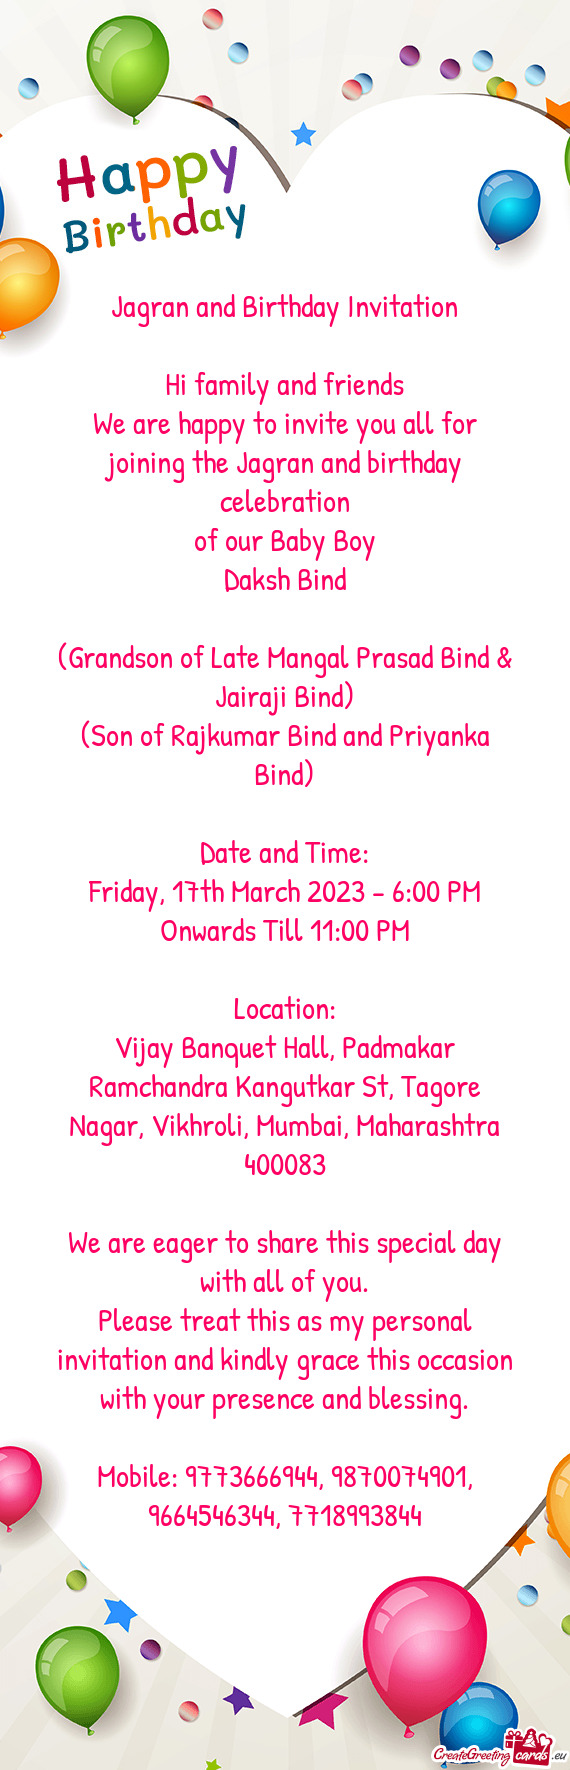 Friday, 17th March 2023 600 PM Onwards Till 1100 PM Free cards